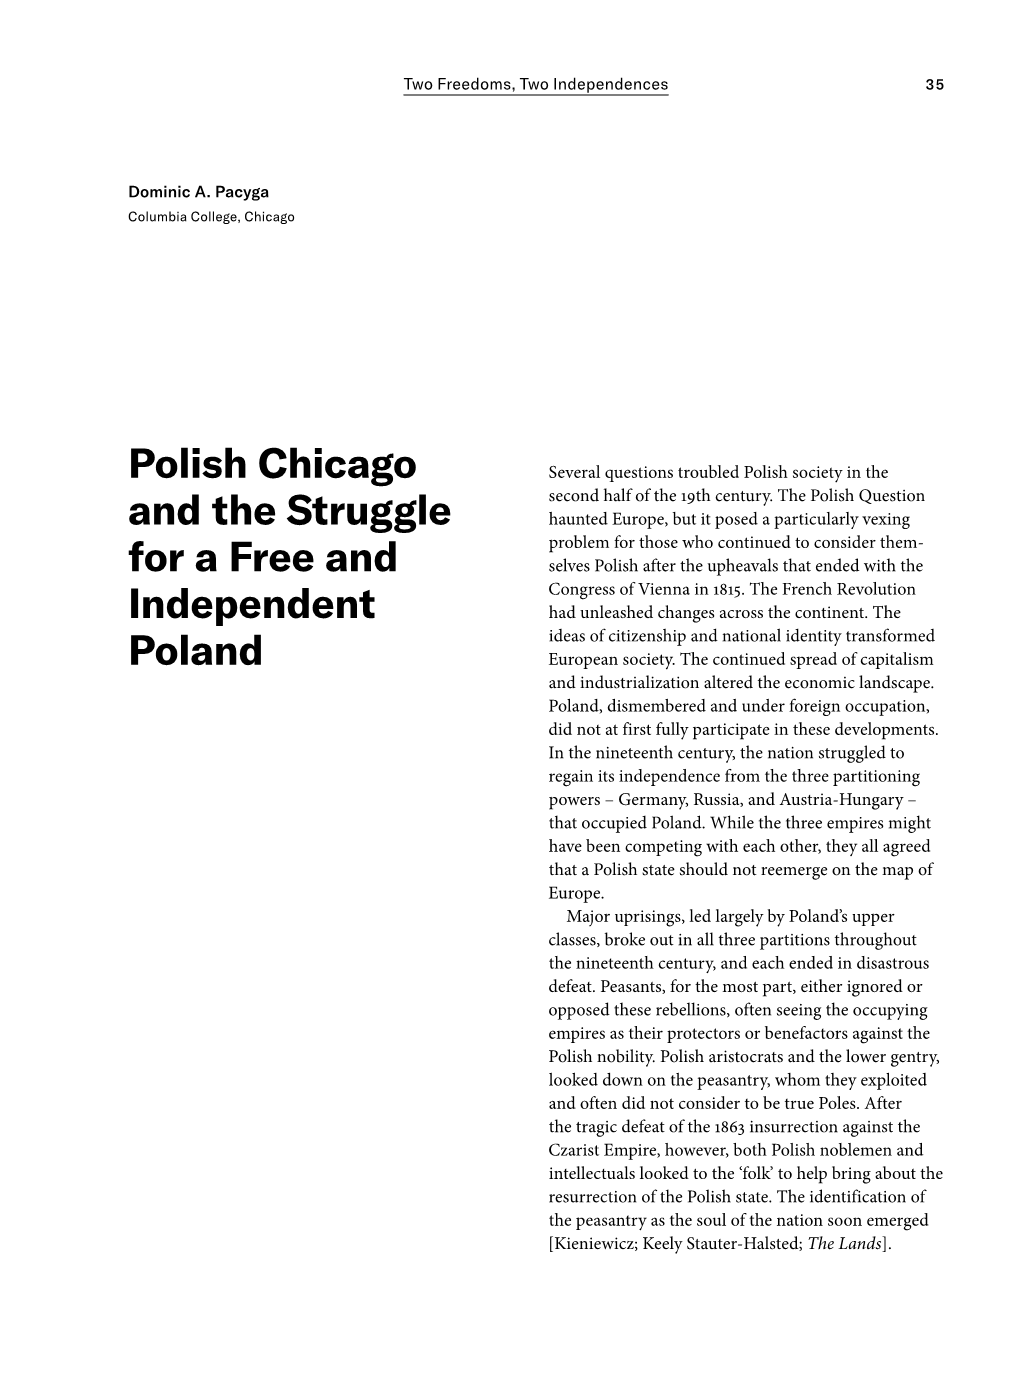 Polish Chicago and the Struggle for a Free and Independent Poland WORKS CITED Poland Disappeared from the Political Map of Europe in the Biskupski, M.B.B